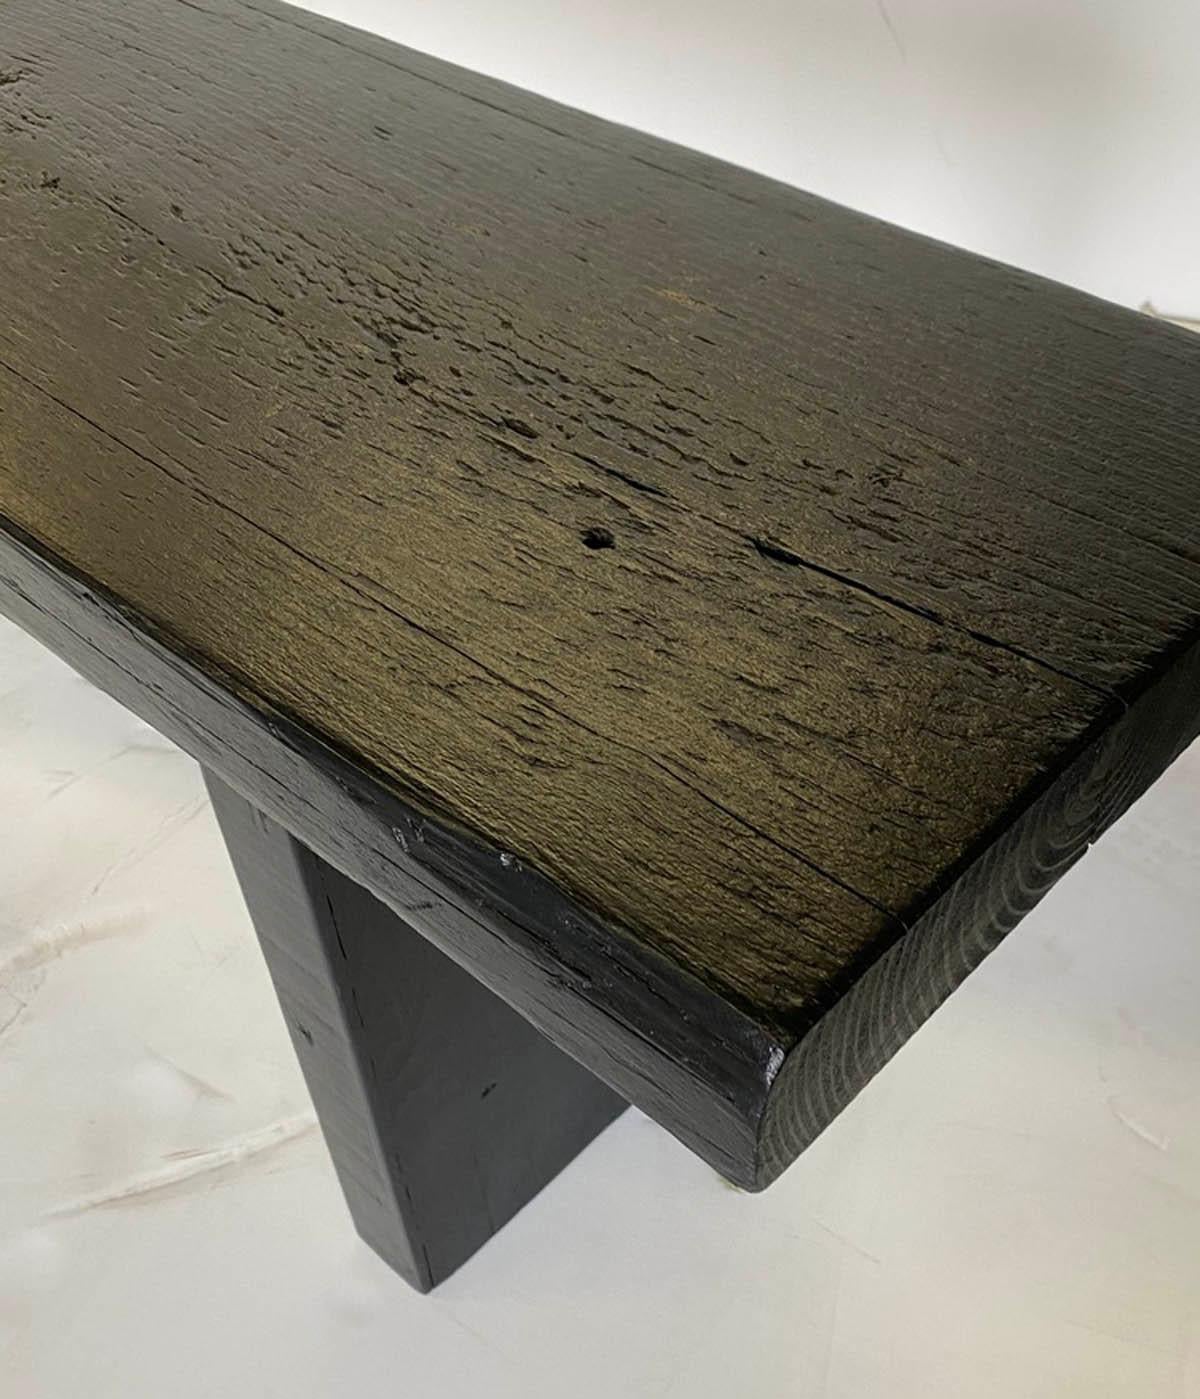 Contemporary Reclaimed Wood Bench in Black Finish